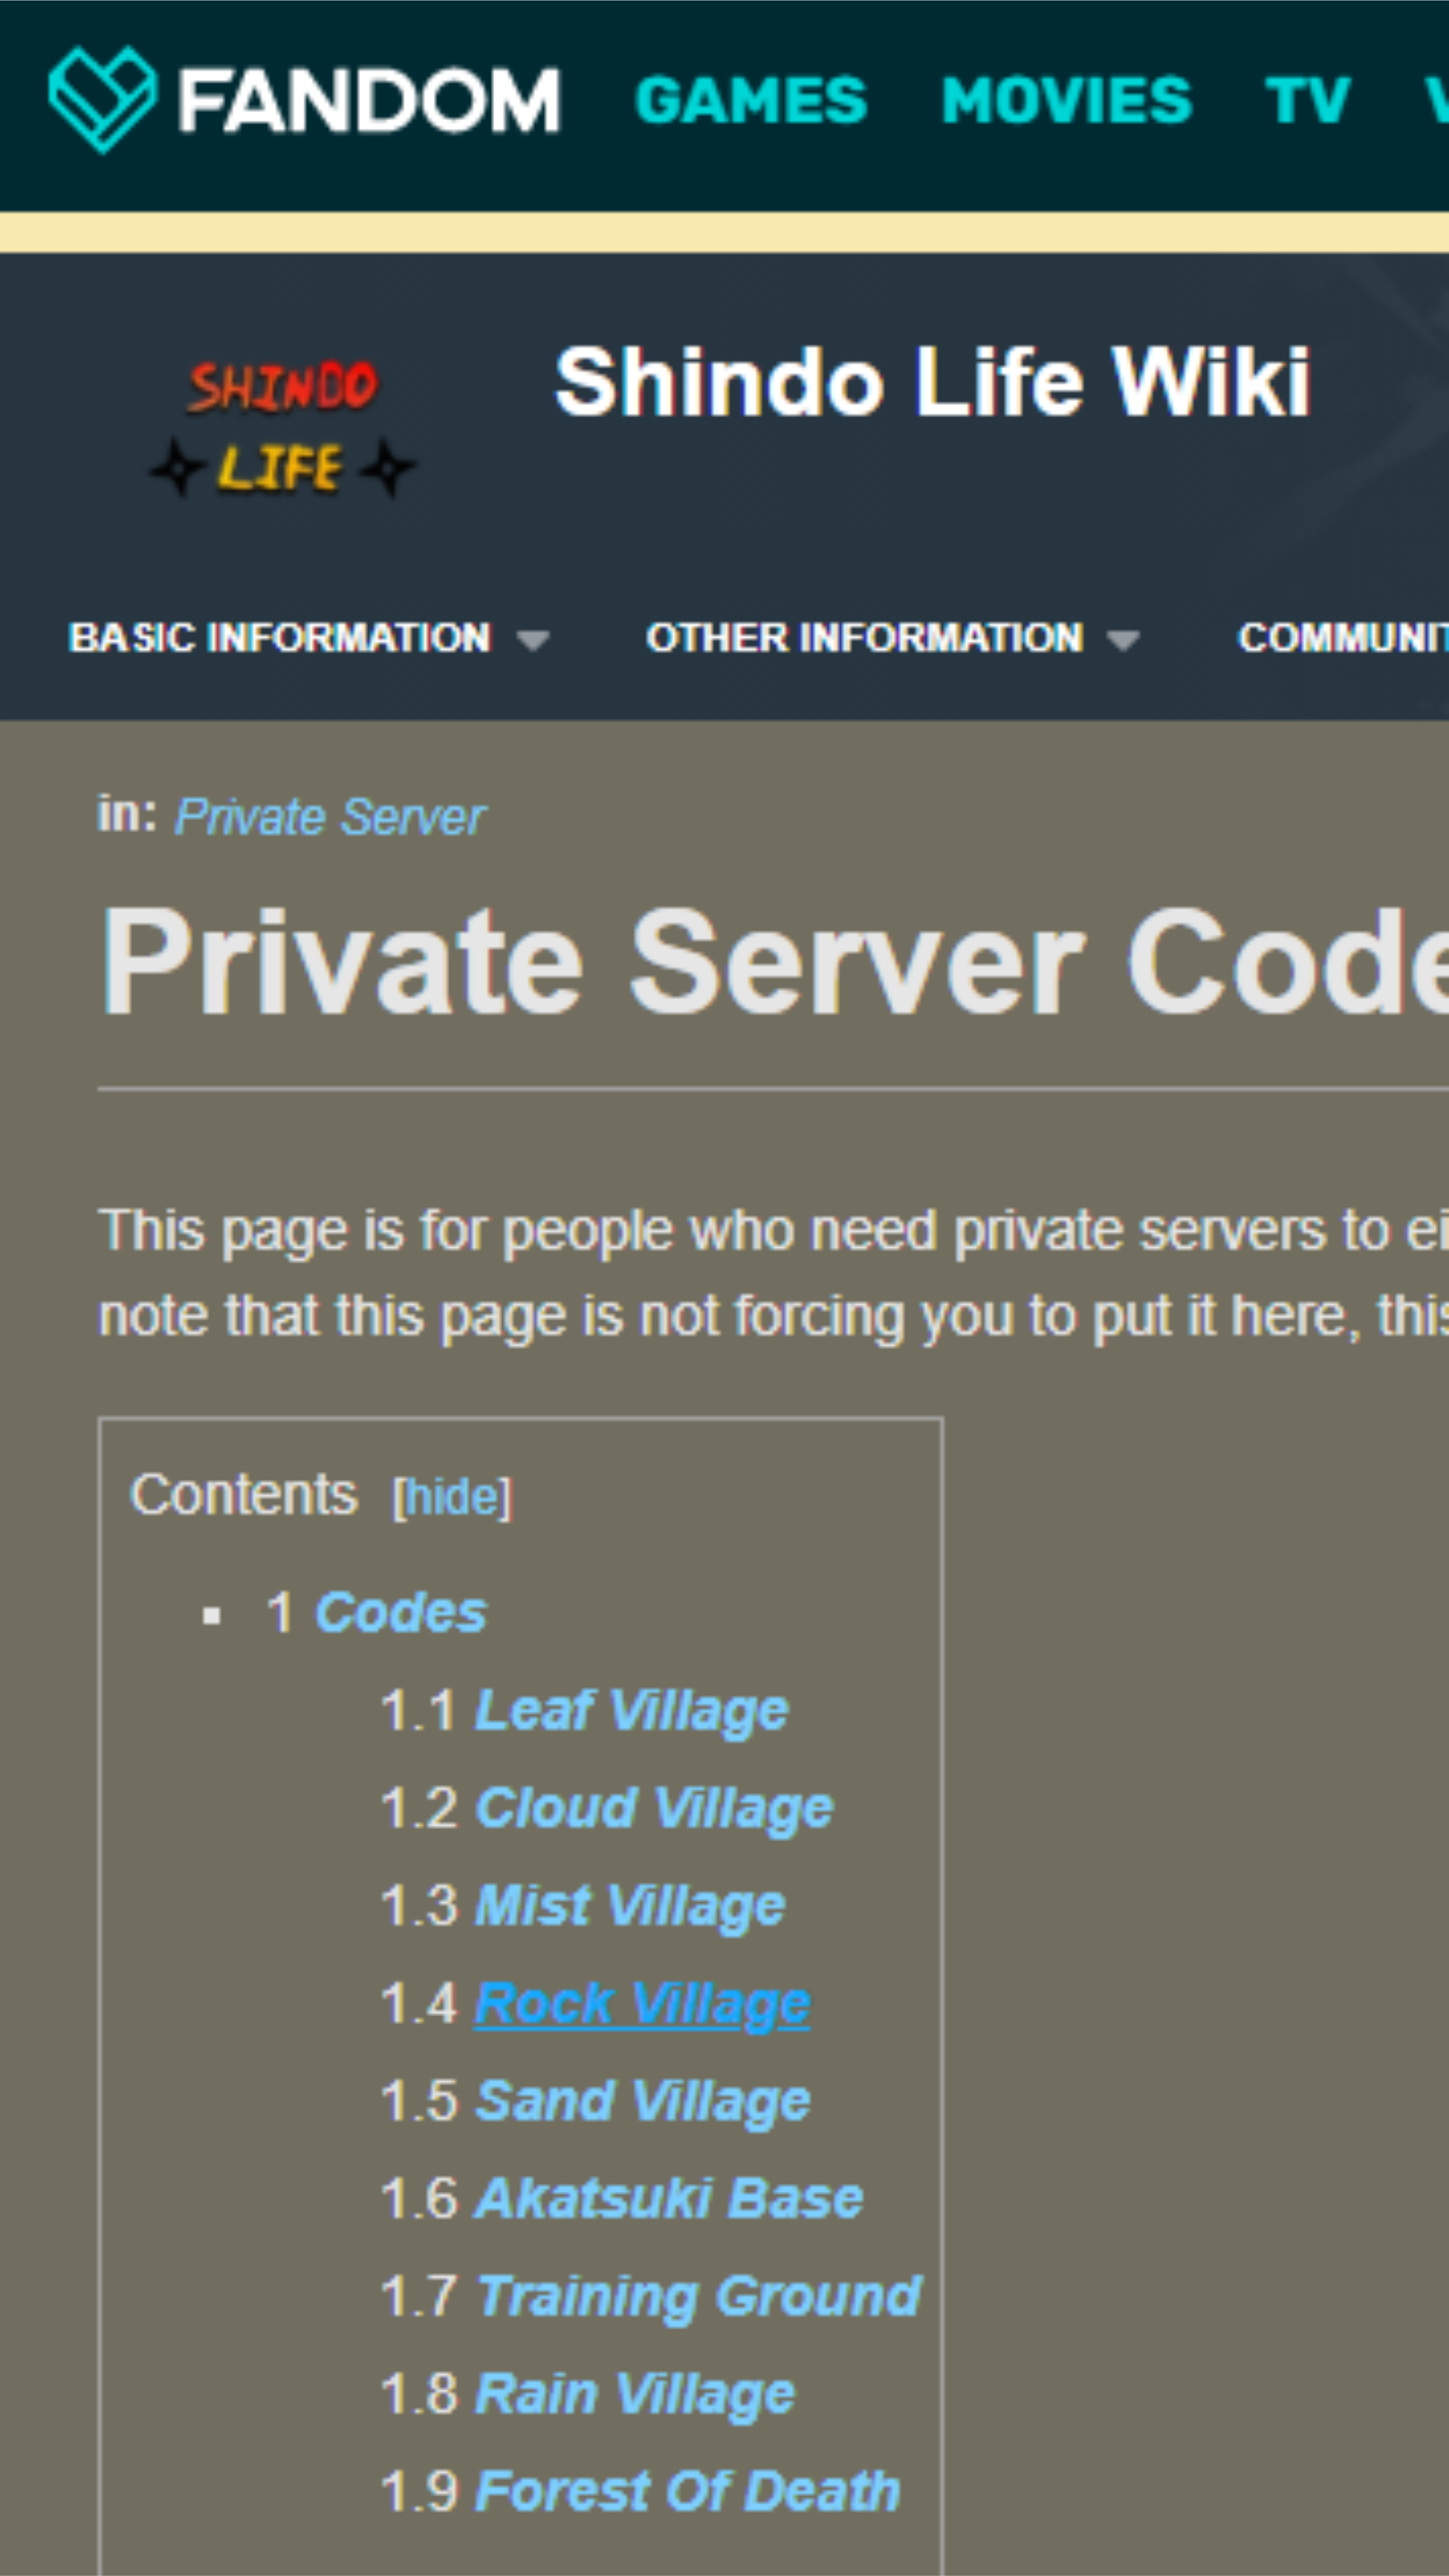 How To Join A Private Server In Shindo Life - roblox does vip server close if owner leaves